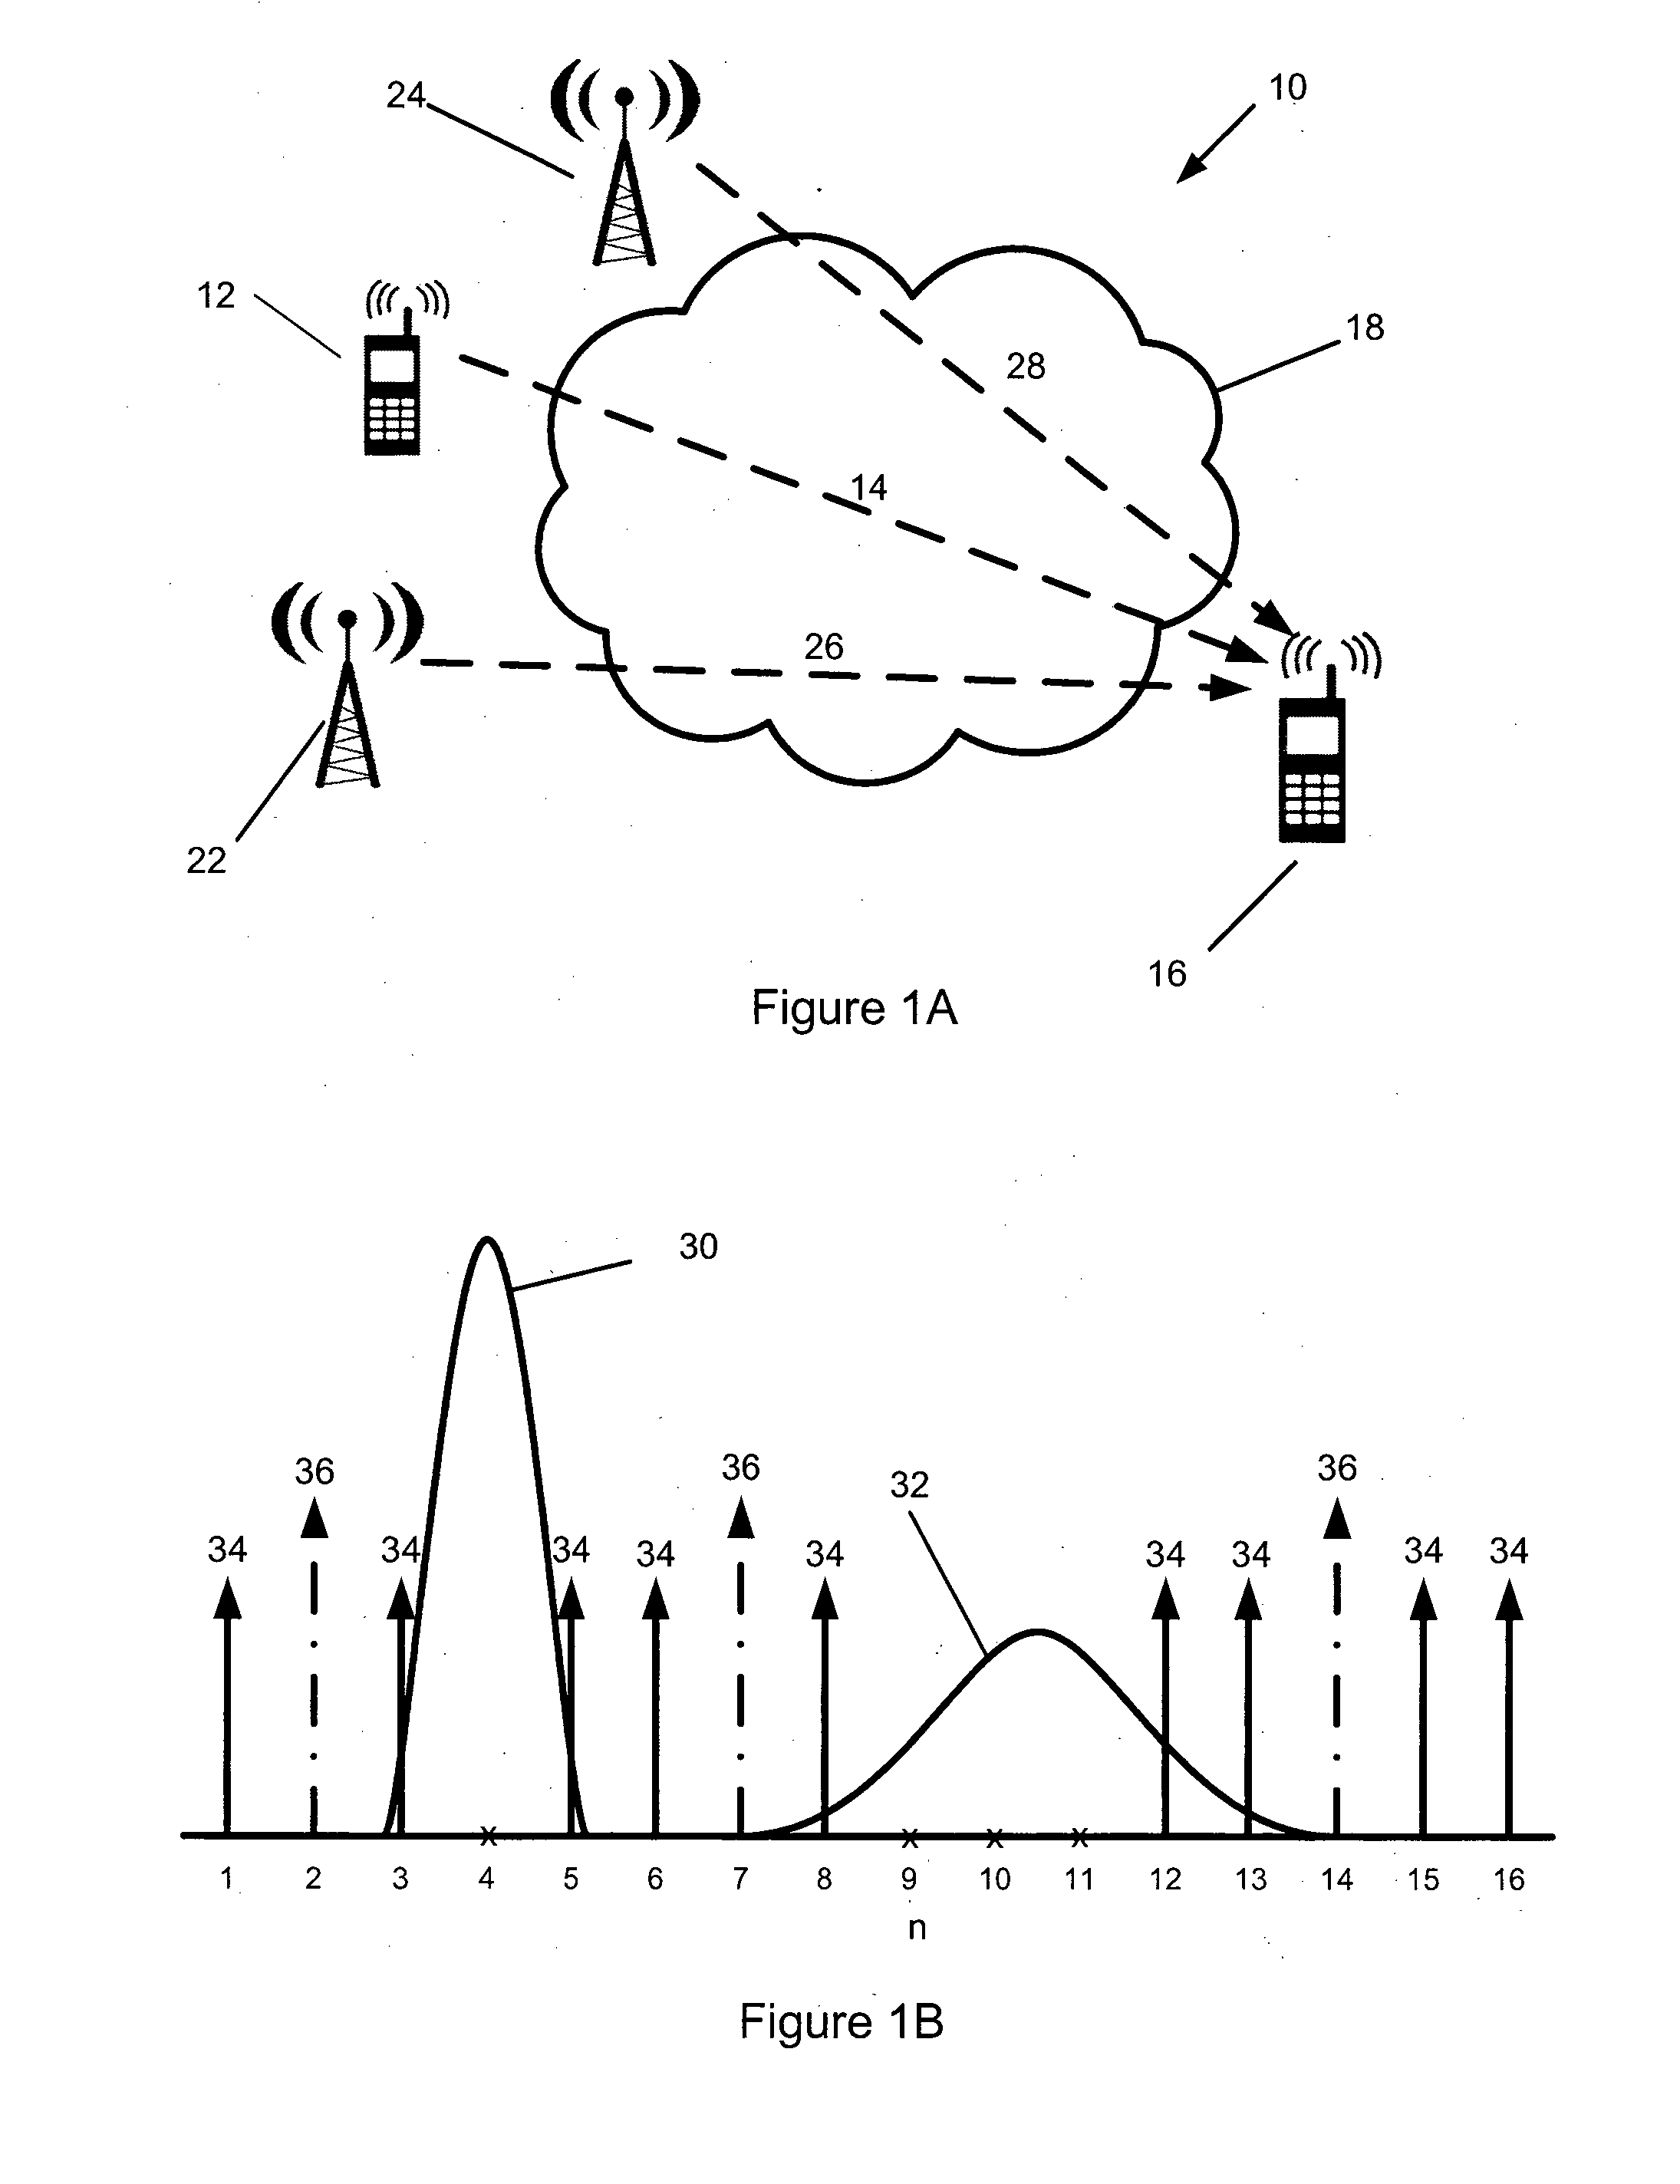 Method for improving channel estimation performance in dynamic spectrum access multicarrier systems